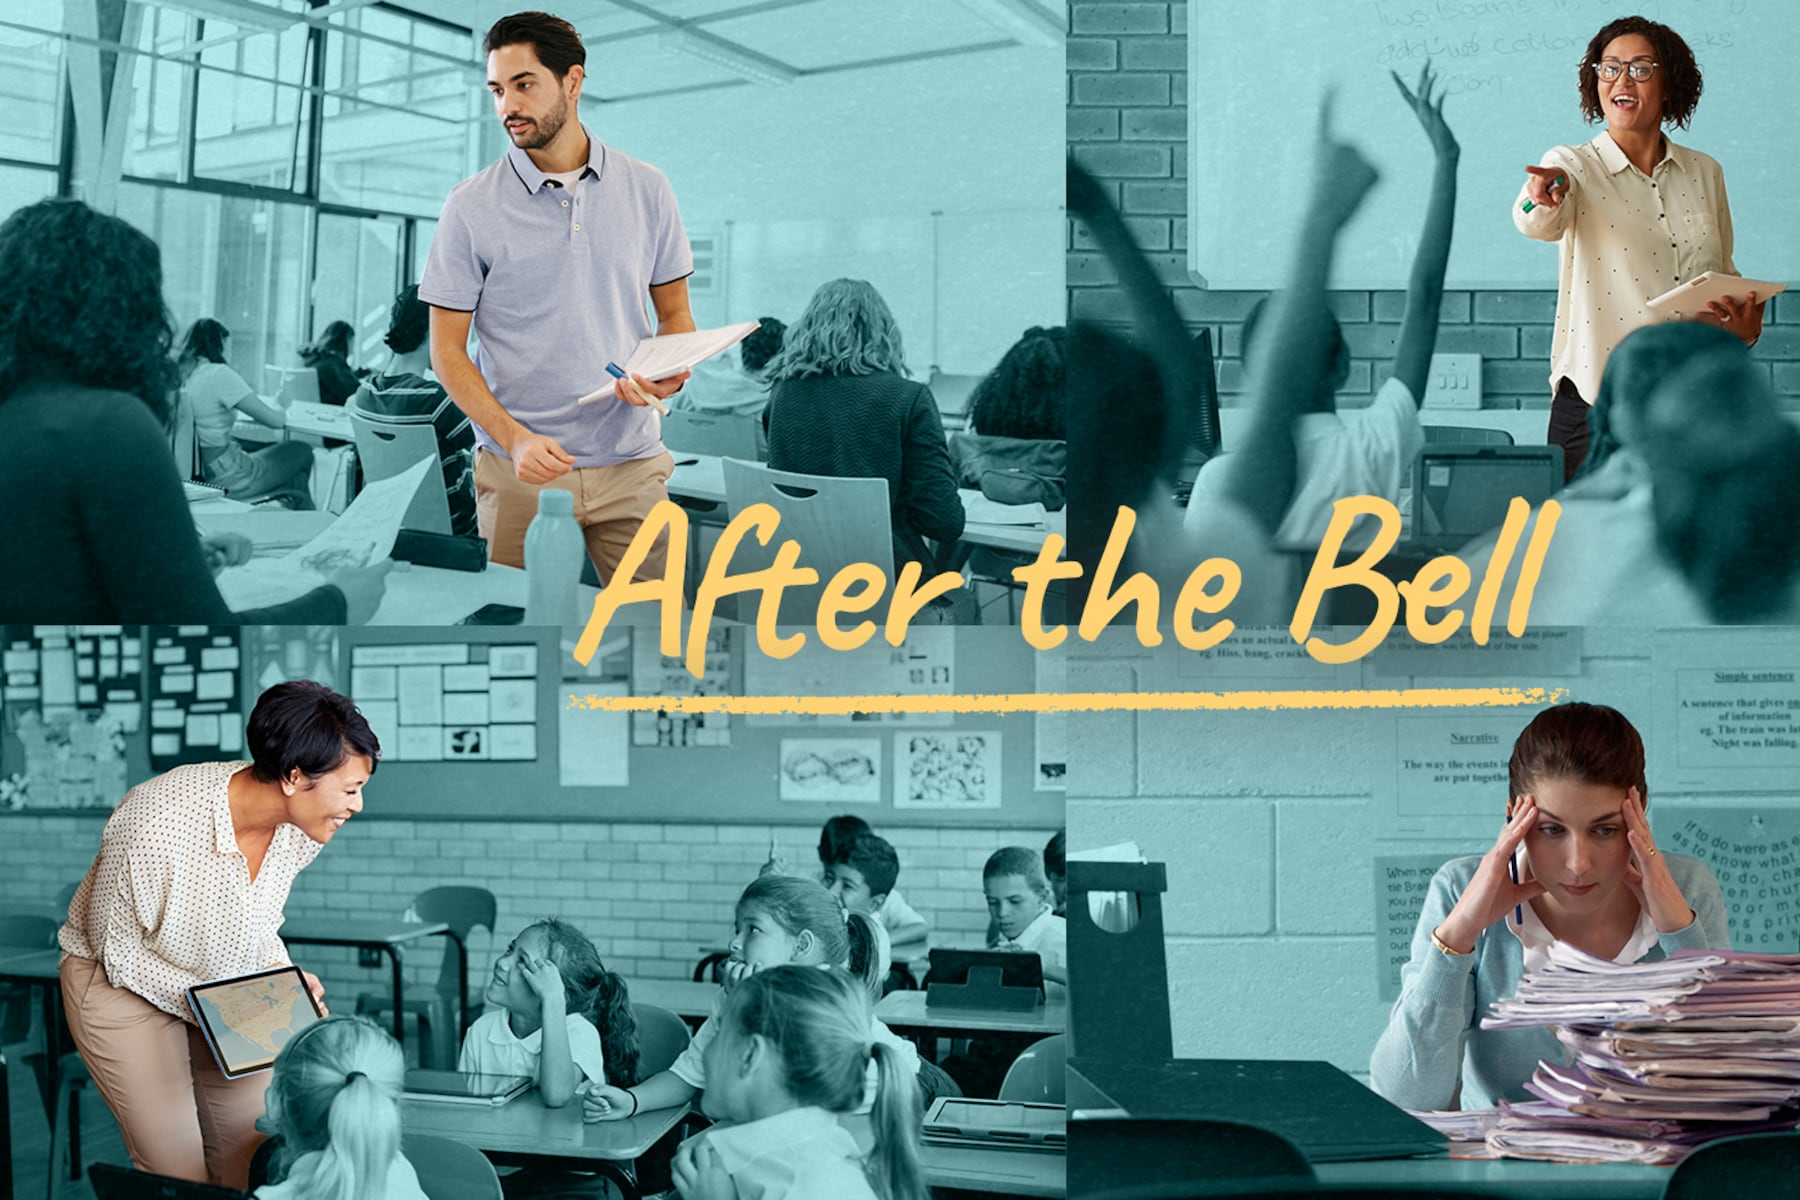 Collage of four teachers in classrooms with the text “After the Bell” overlaid on top.